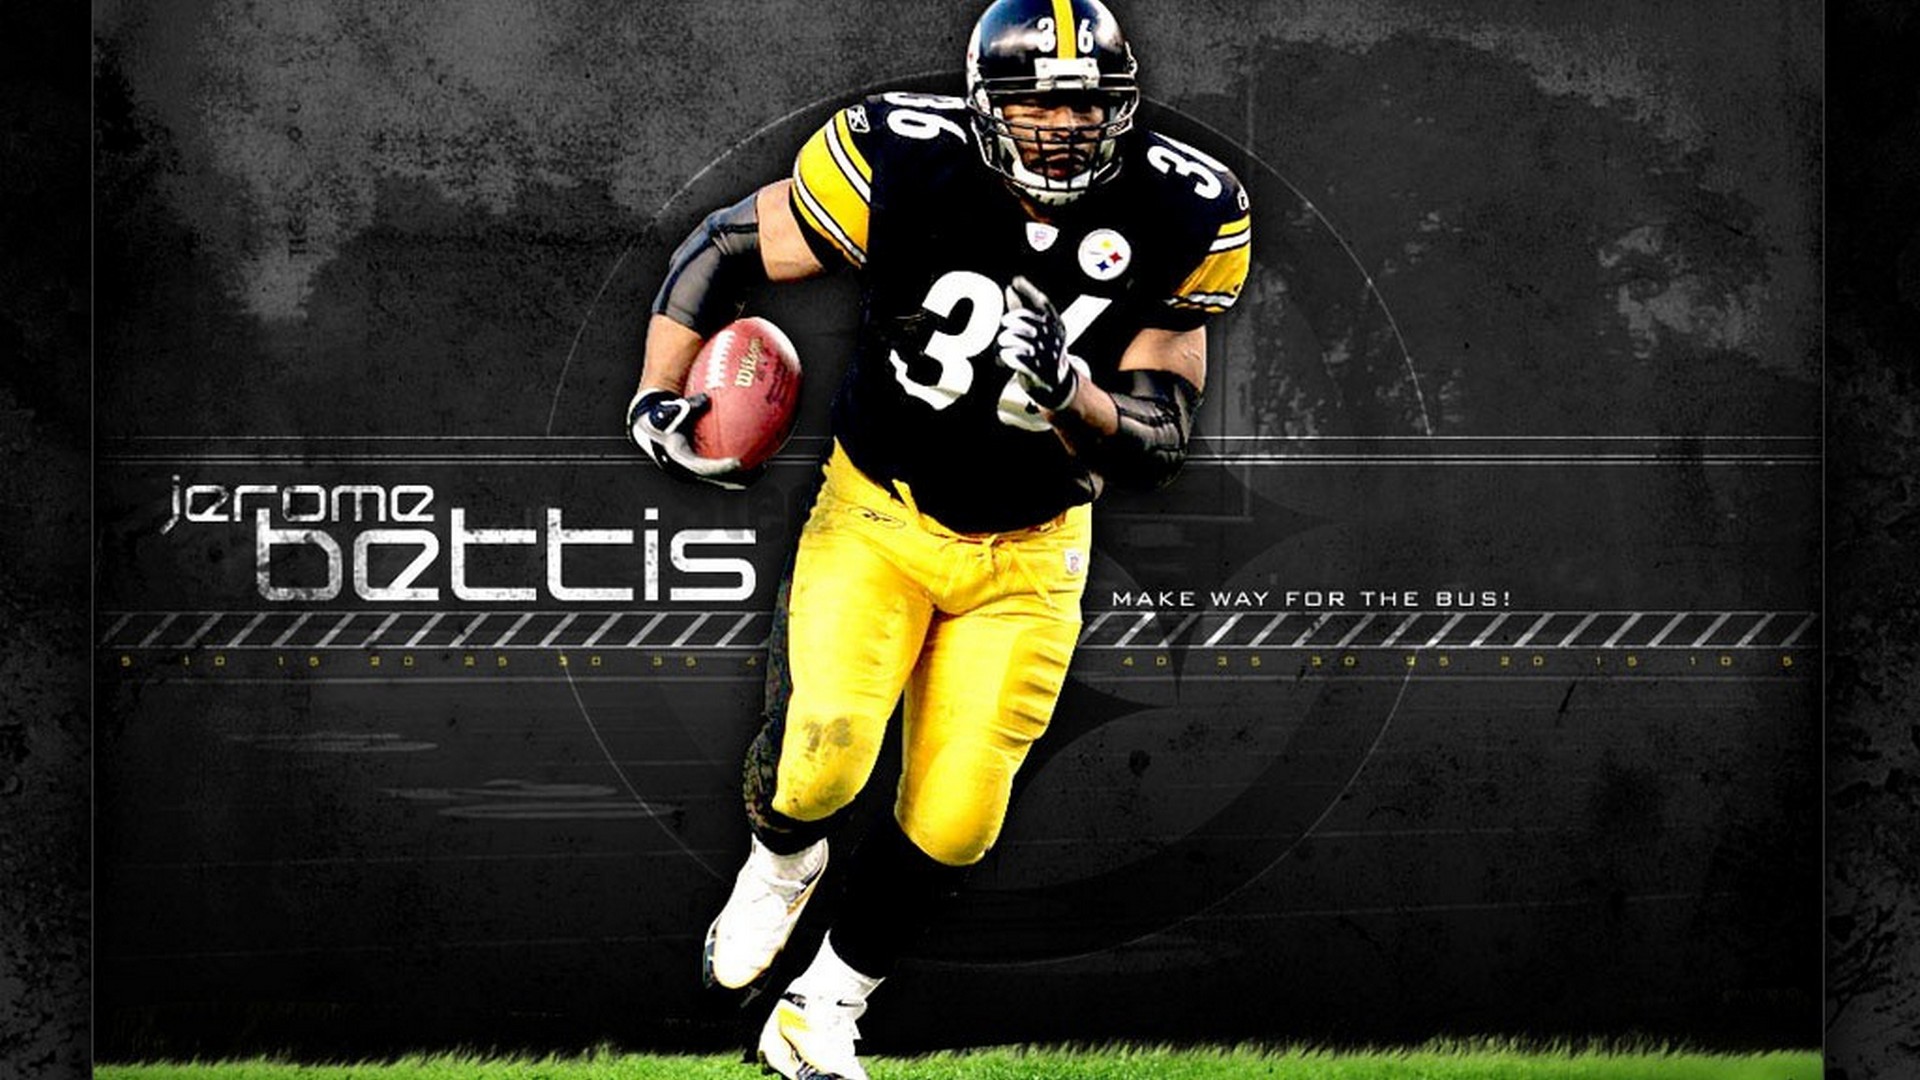 HD Steelers Football Backgrounds with resolution 1920x1080 pixel. You can make this wallpaper for your Mac or Windows Desktop Background, iPhone, Android or Tablet and another Smartphone device